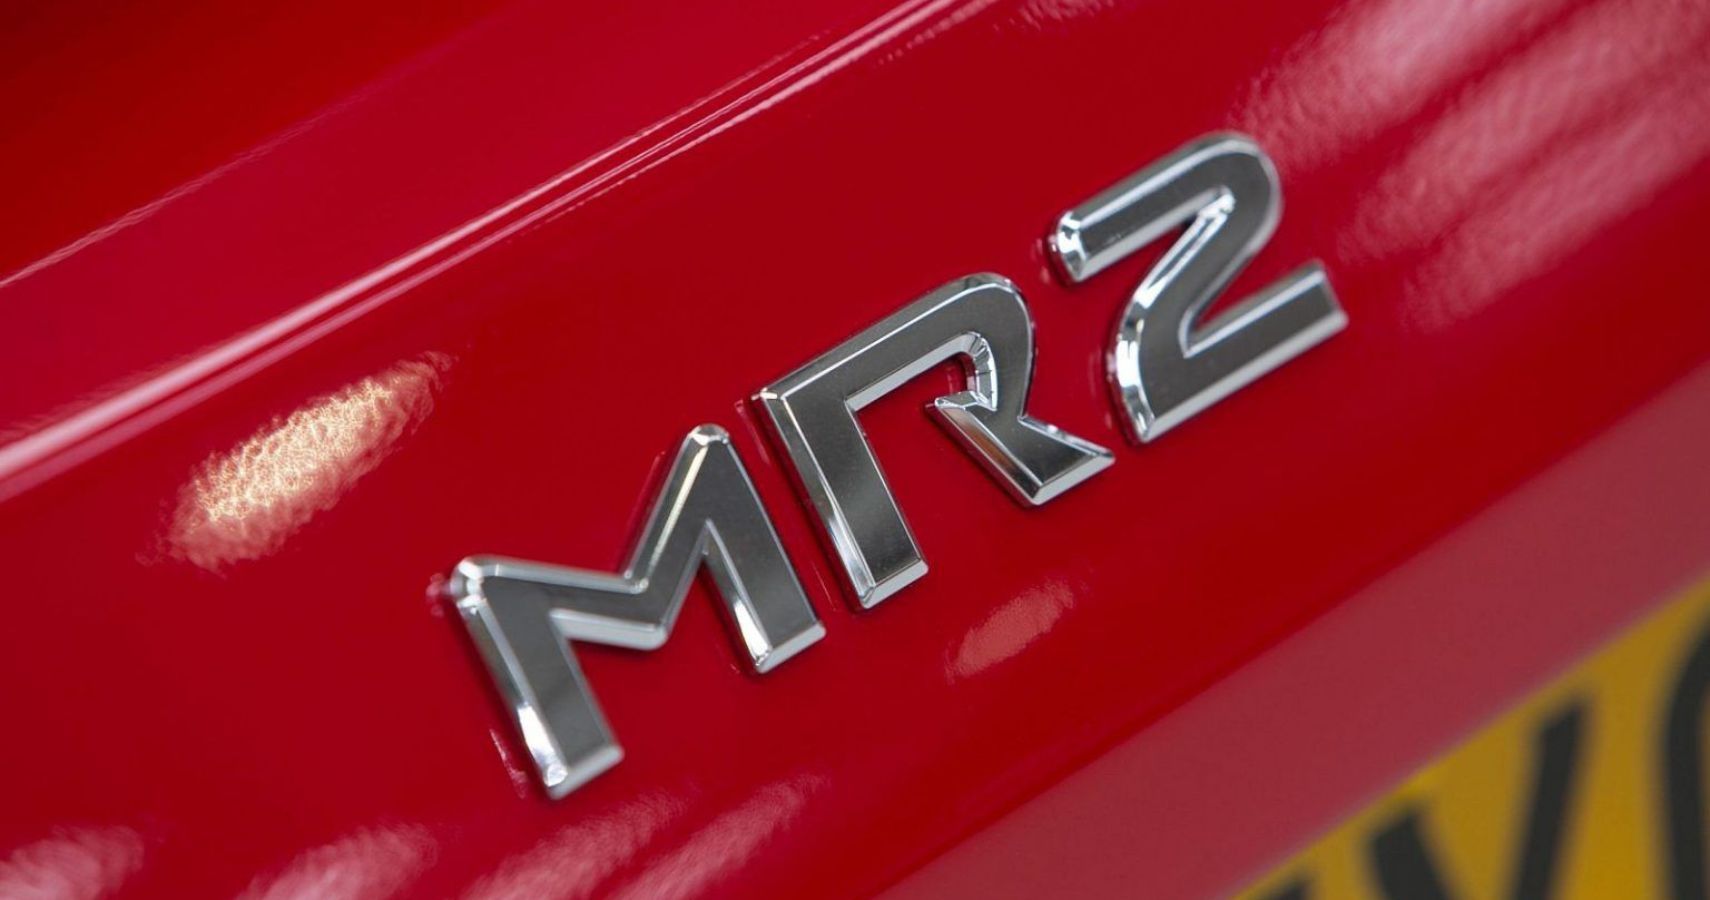 The badging of the 1991 Toyota MR2